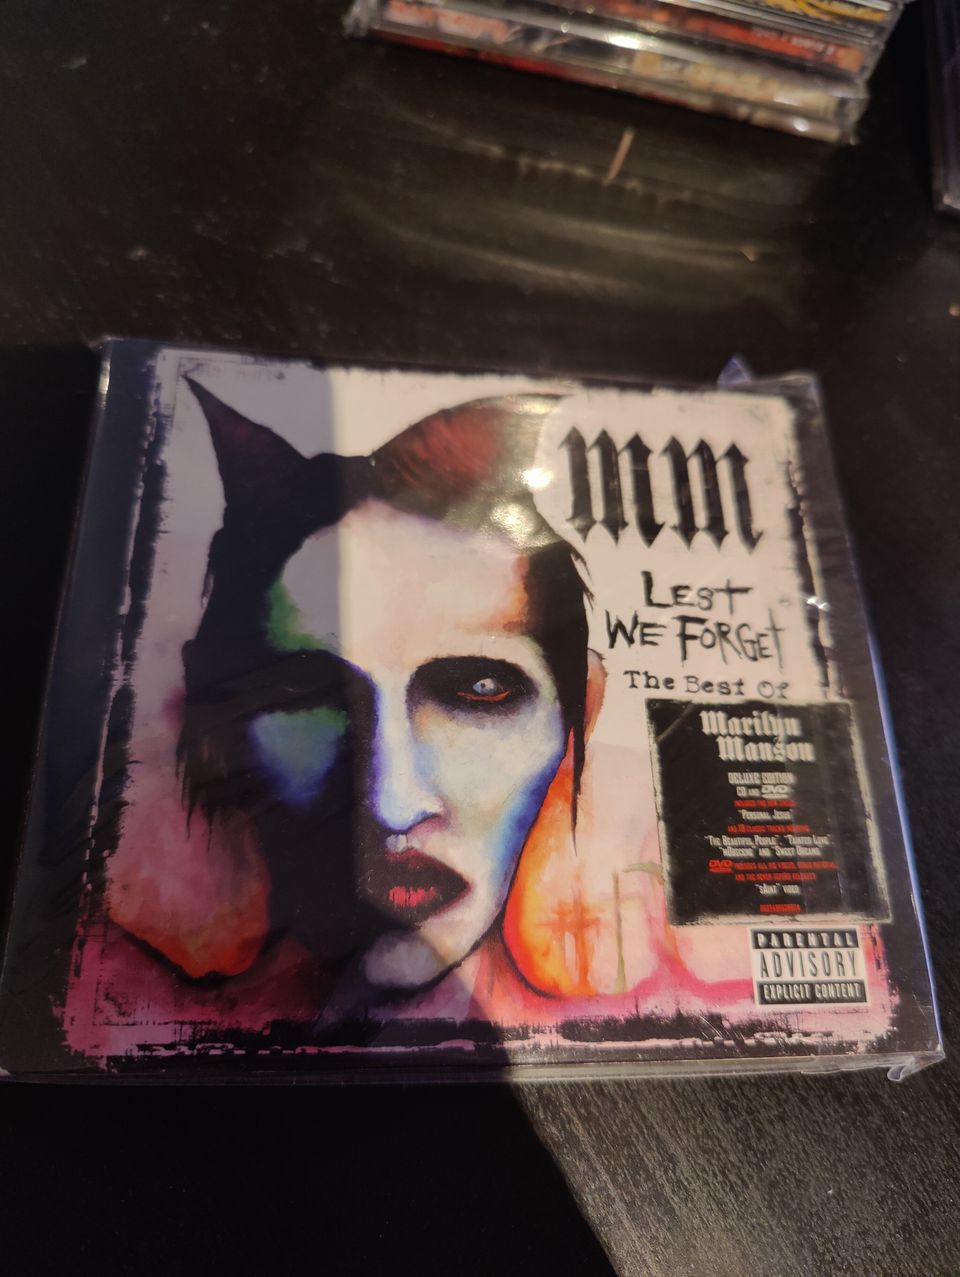 Marilyn Manson Lest We Forget the best of CD+DVD VG+/VG/G